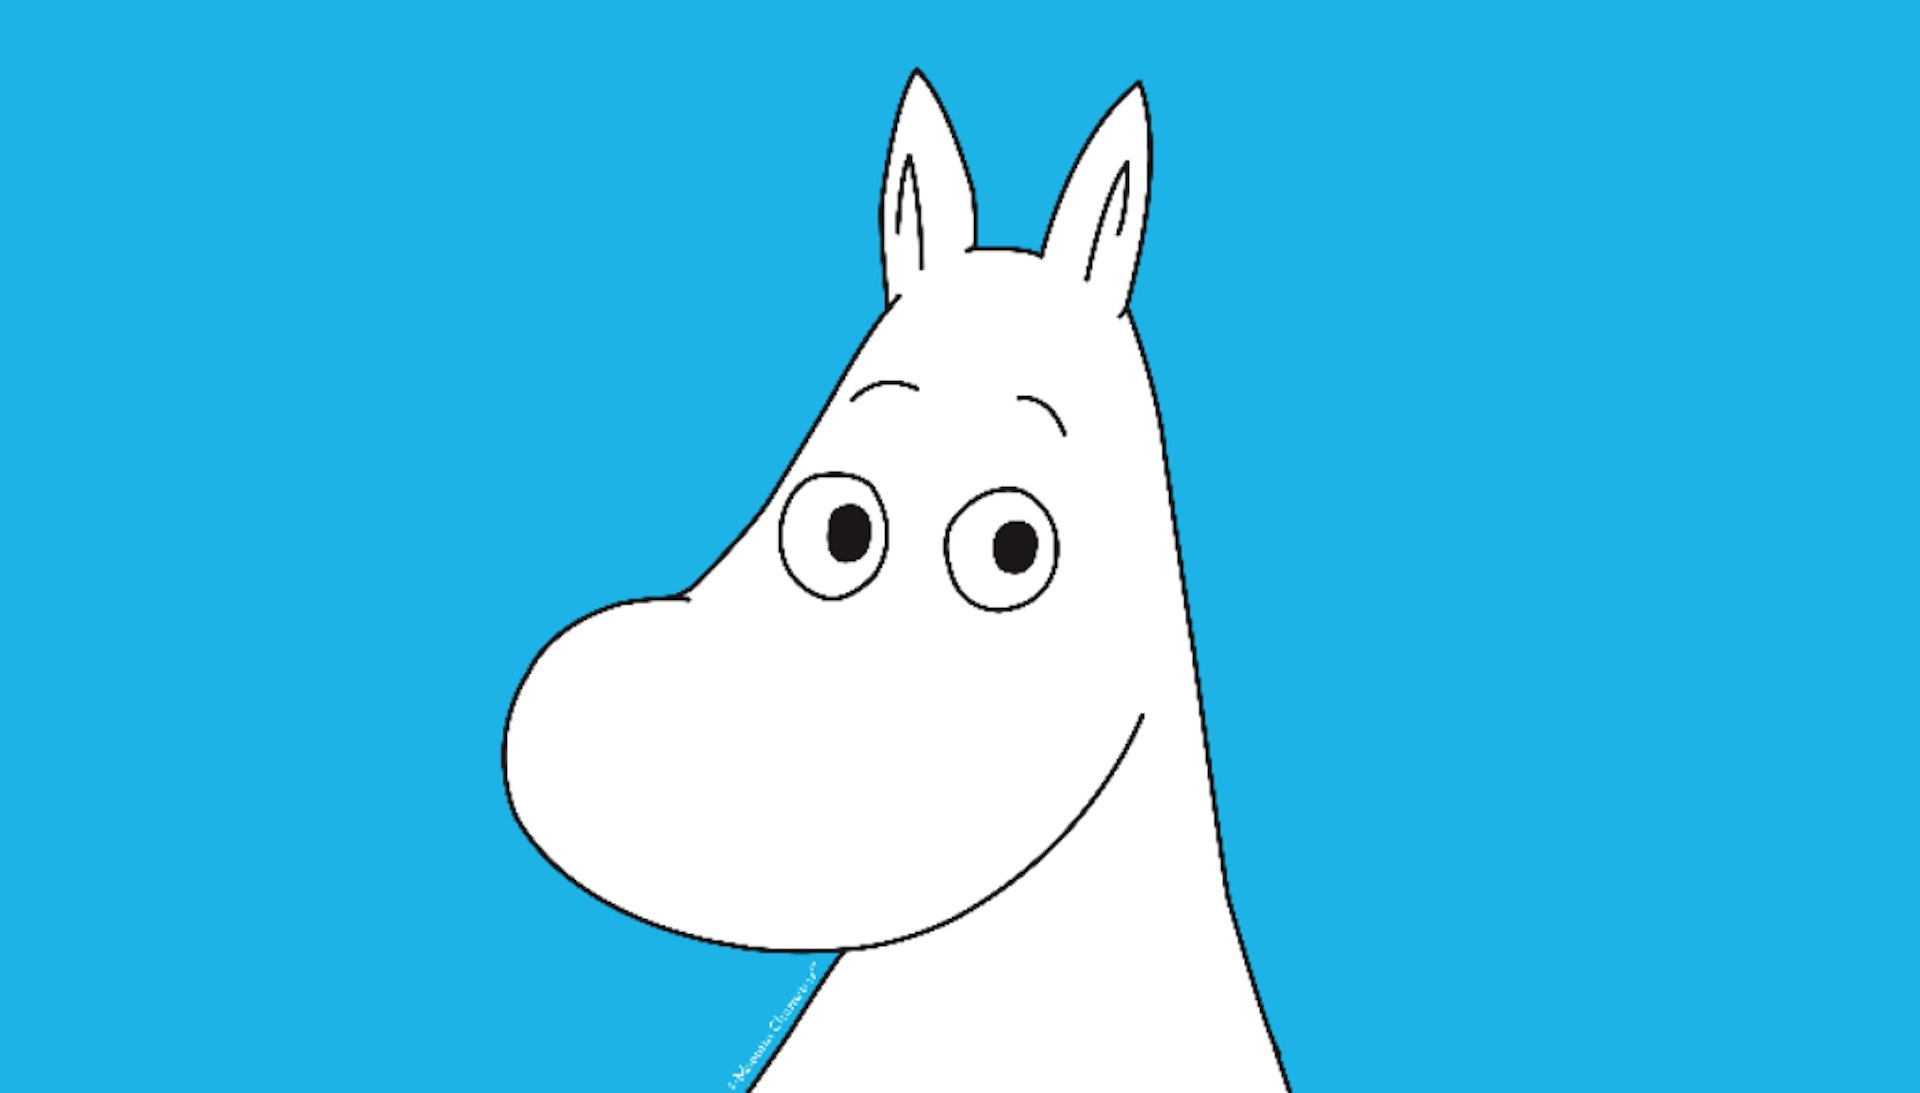 How the Moomins became an anti-fascist symbol